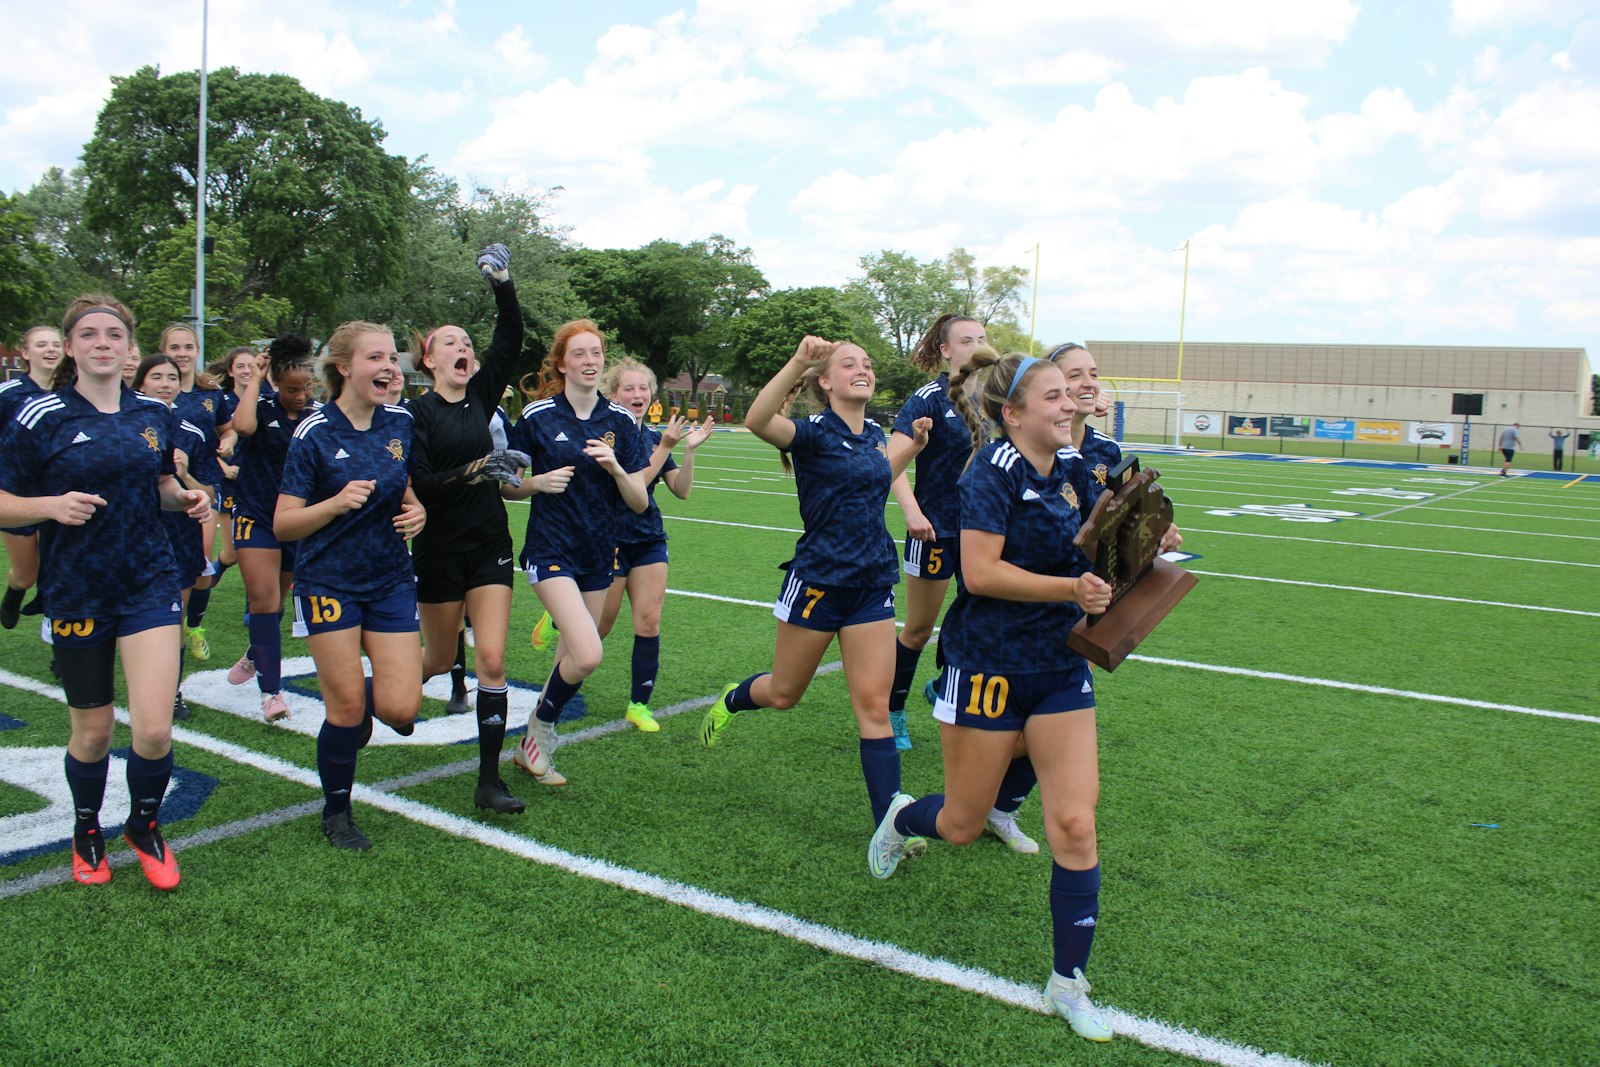 After defeating Plymouth Christian 2-0 to win the regional crown, Royal Oak Shrine soccer players rush toward the fan section with the championship trophy in hand.